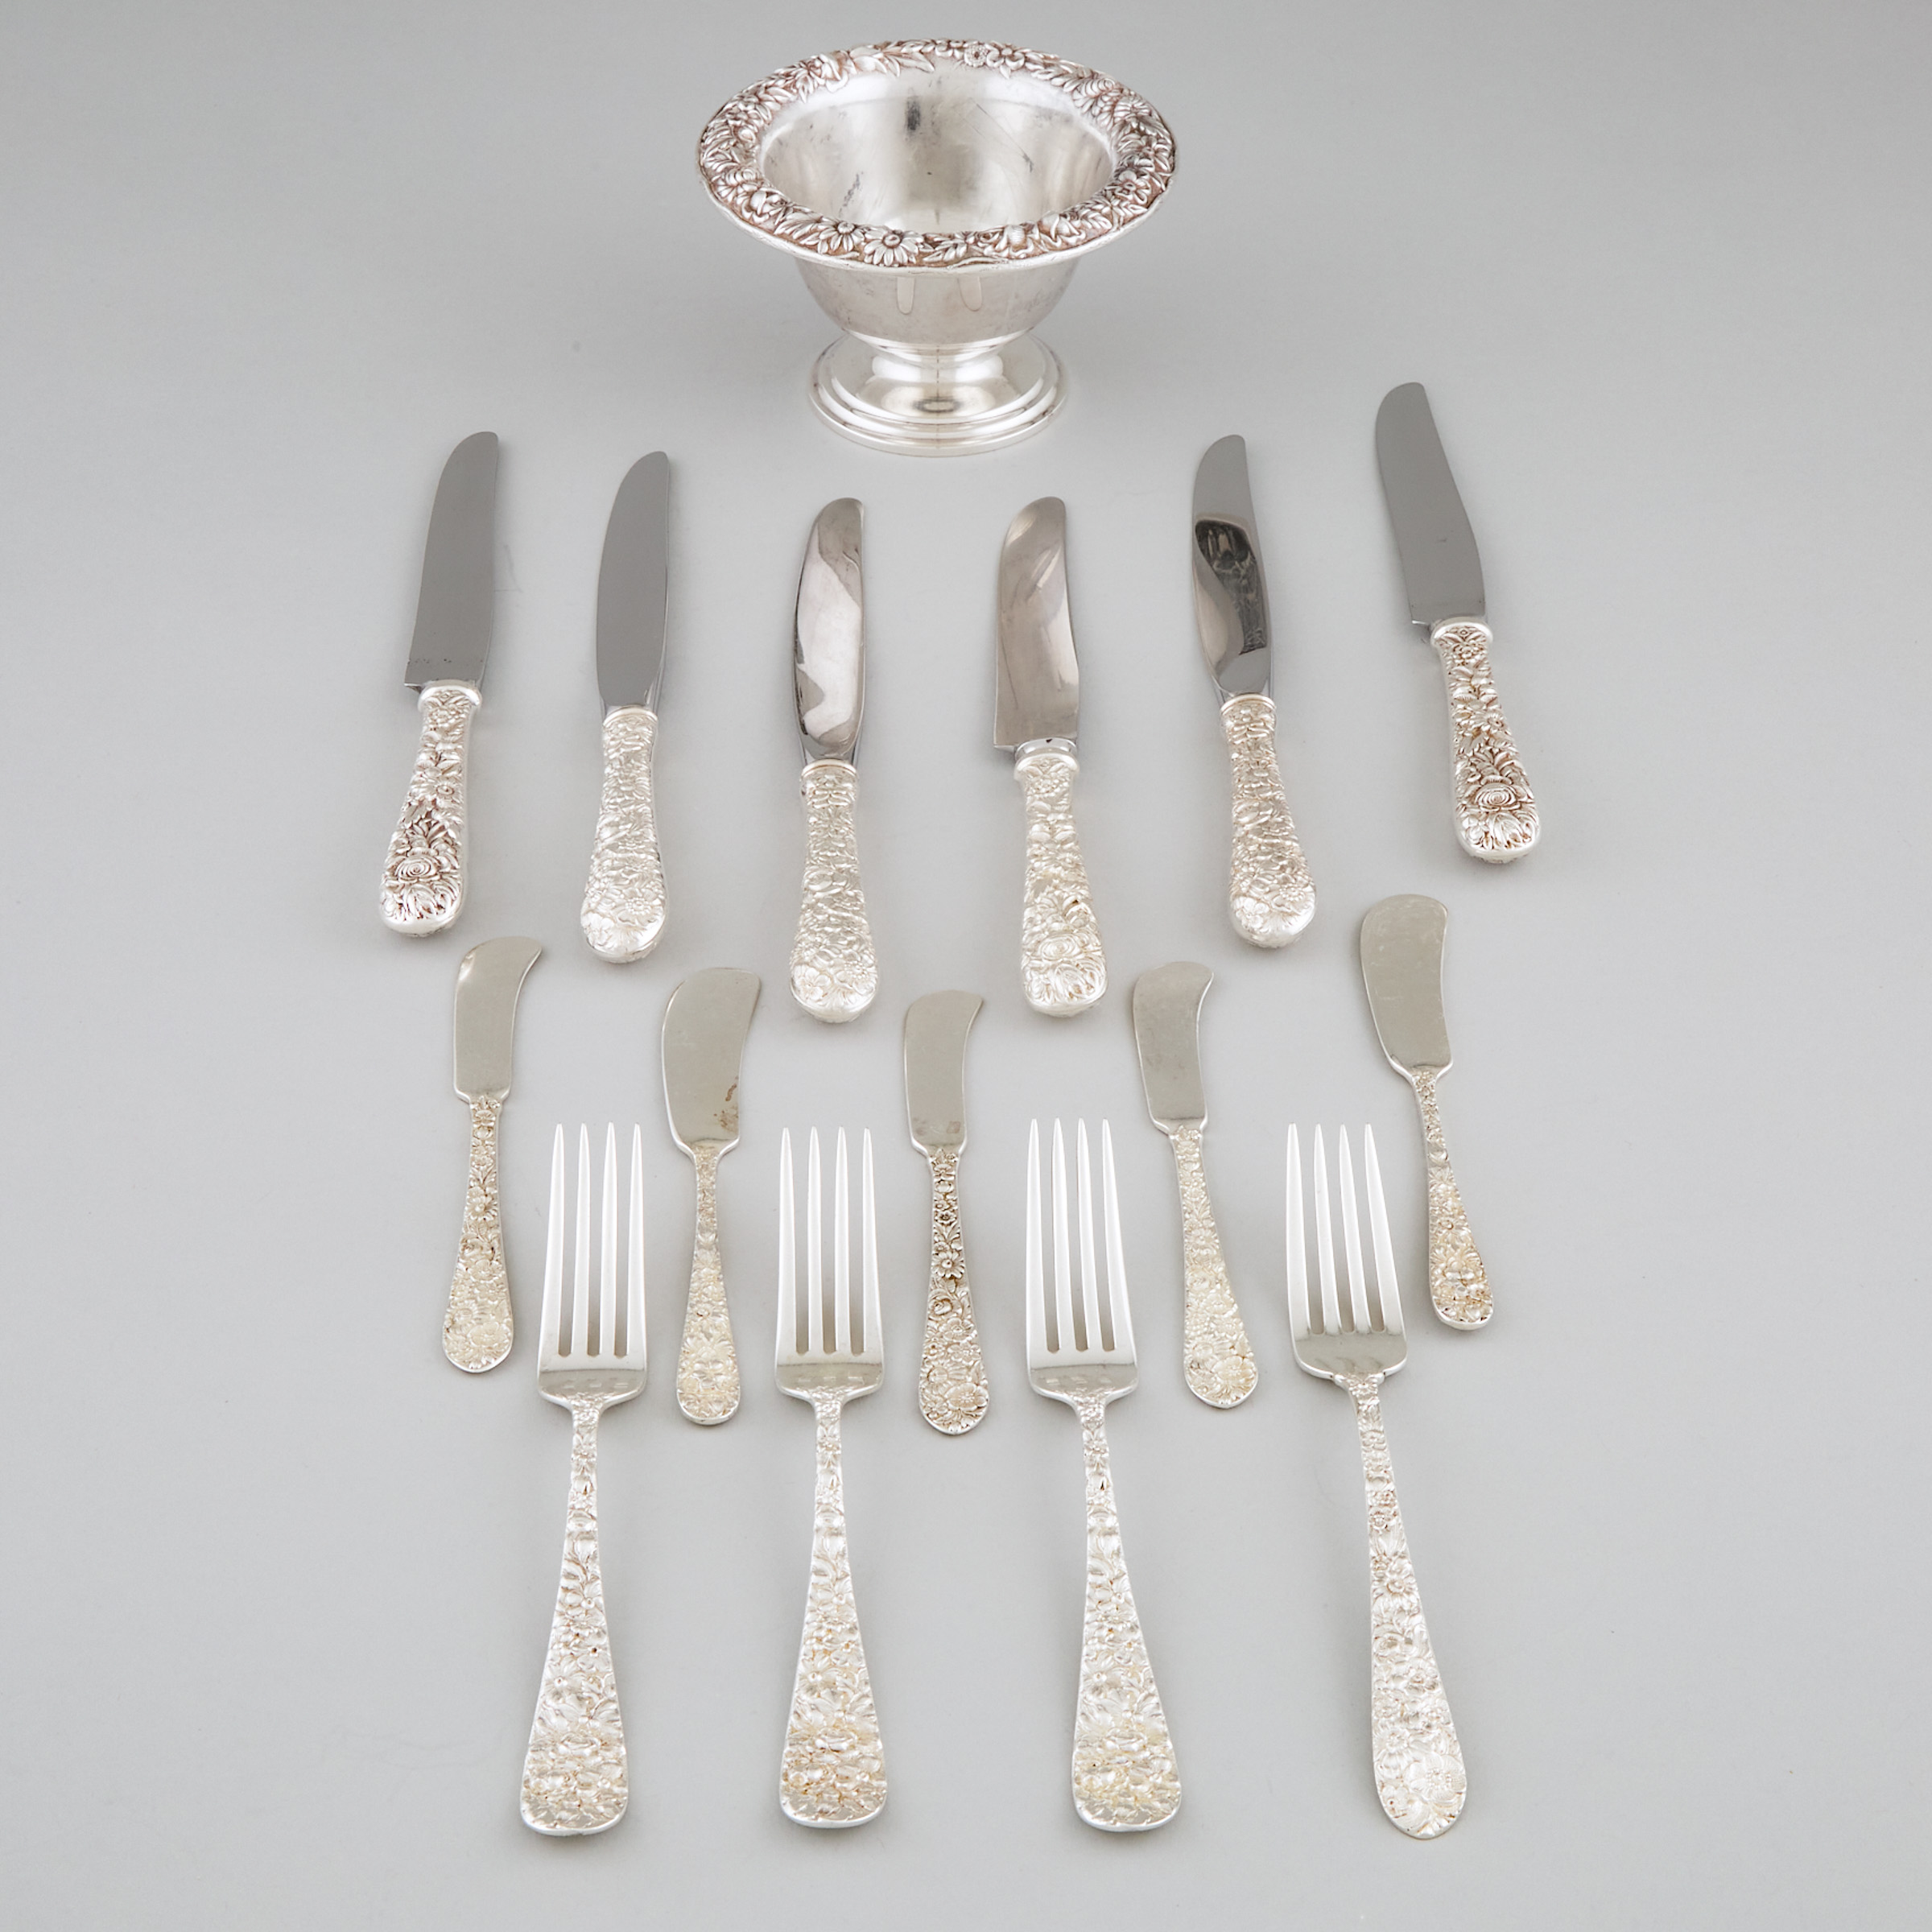 American Silver 'Repoussé' Footed Small Bowl, Samuel Kirk & Son, Baltimore, Md., and Fifteen Pieces of Flatware, 20th century